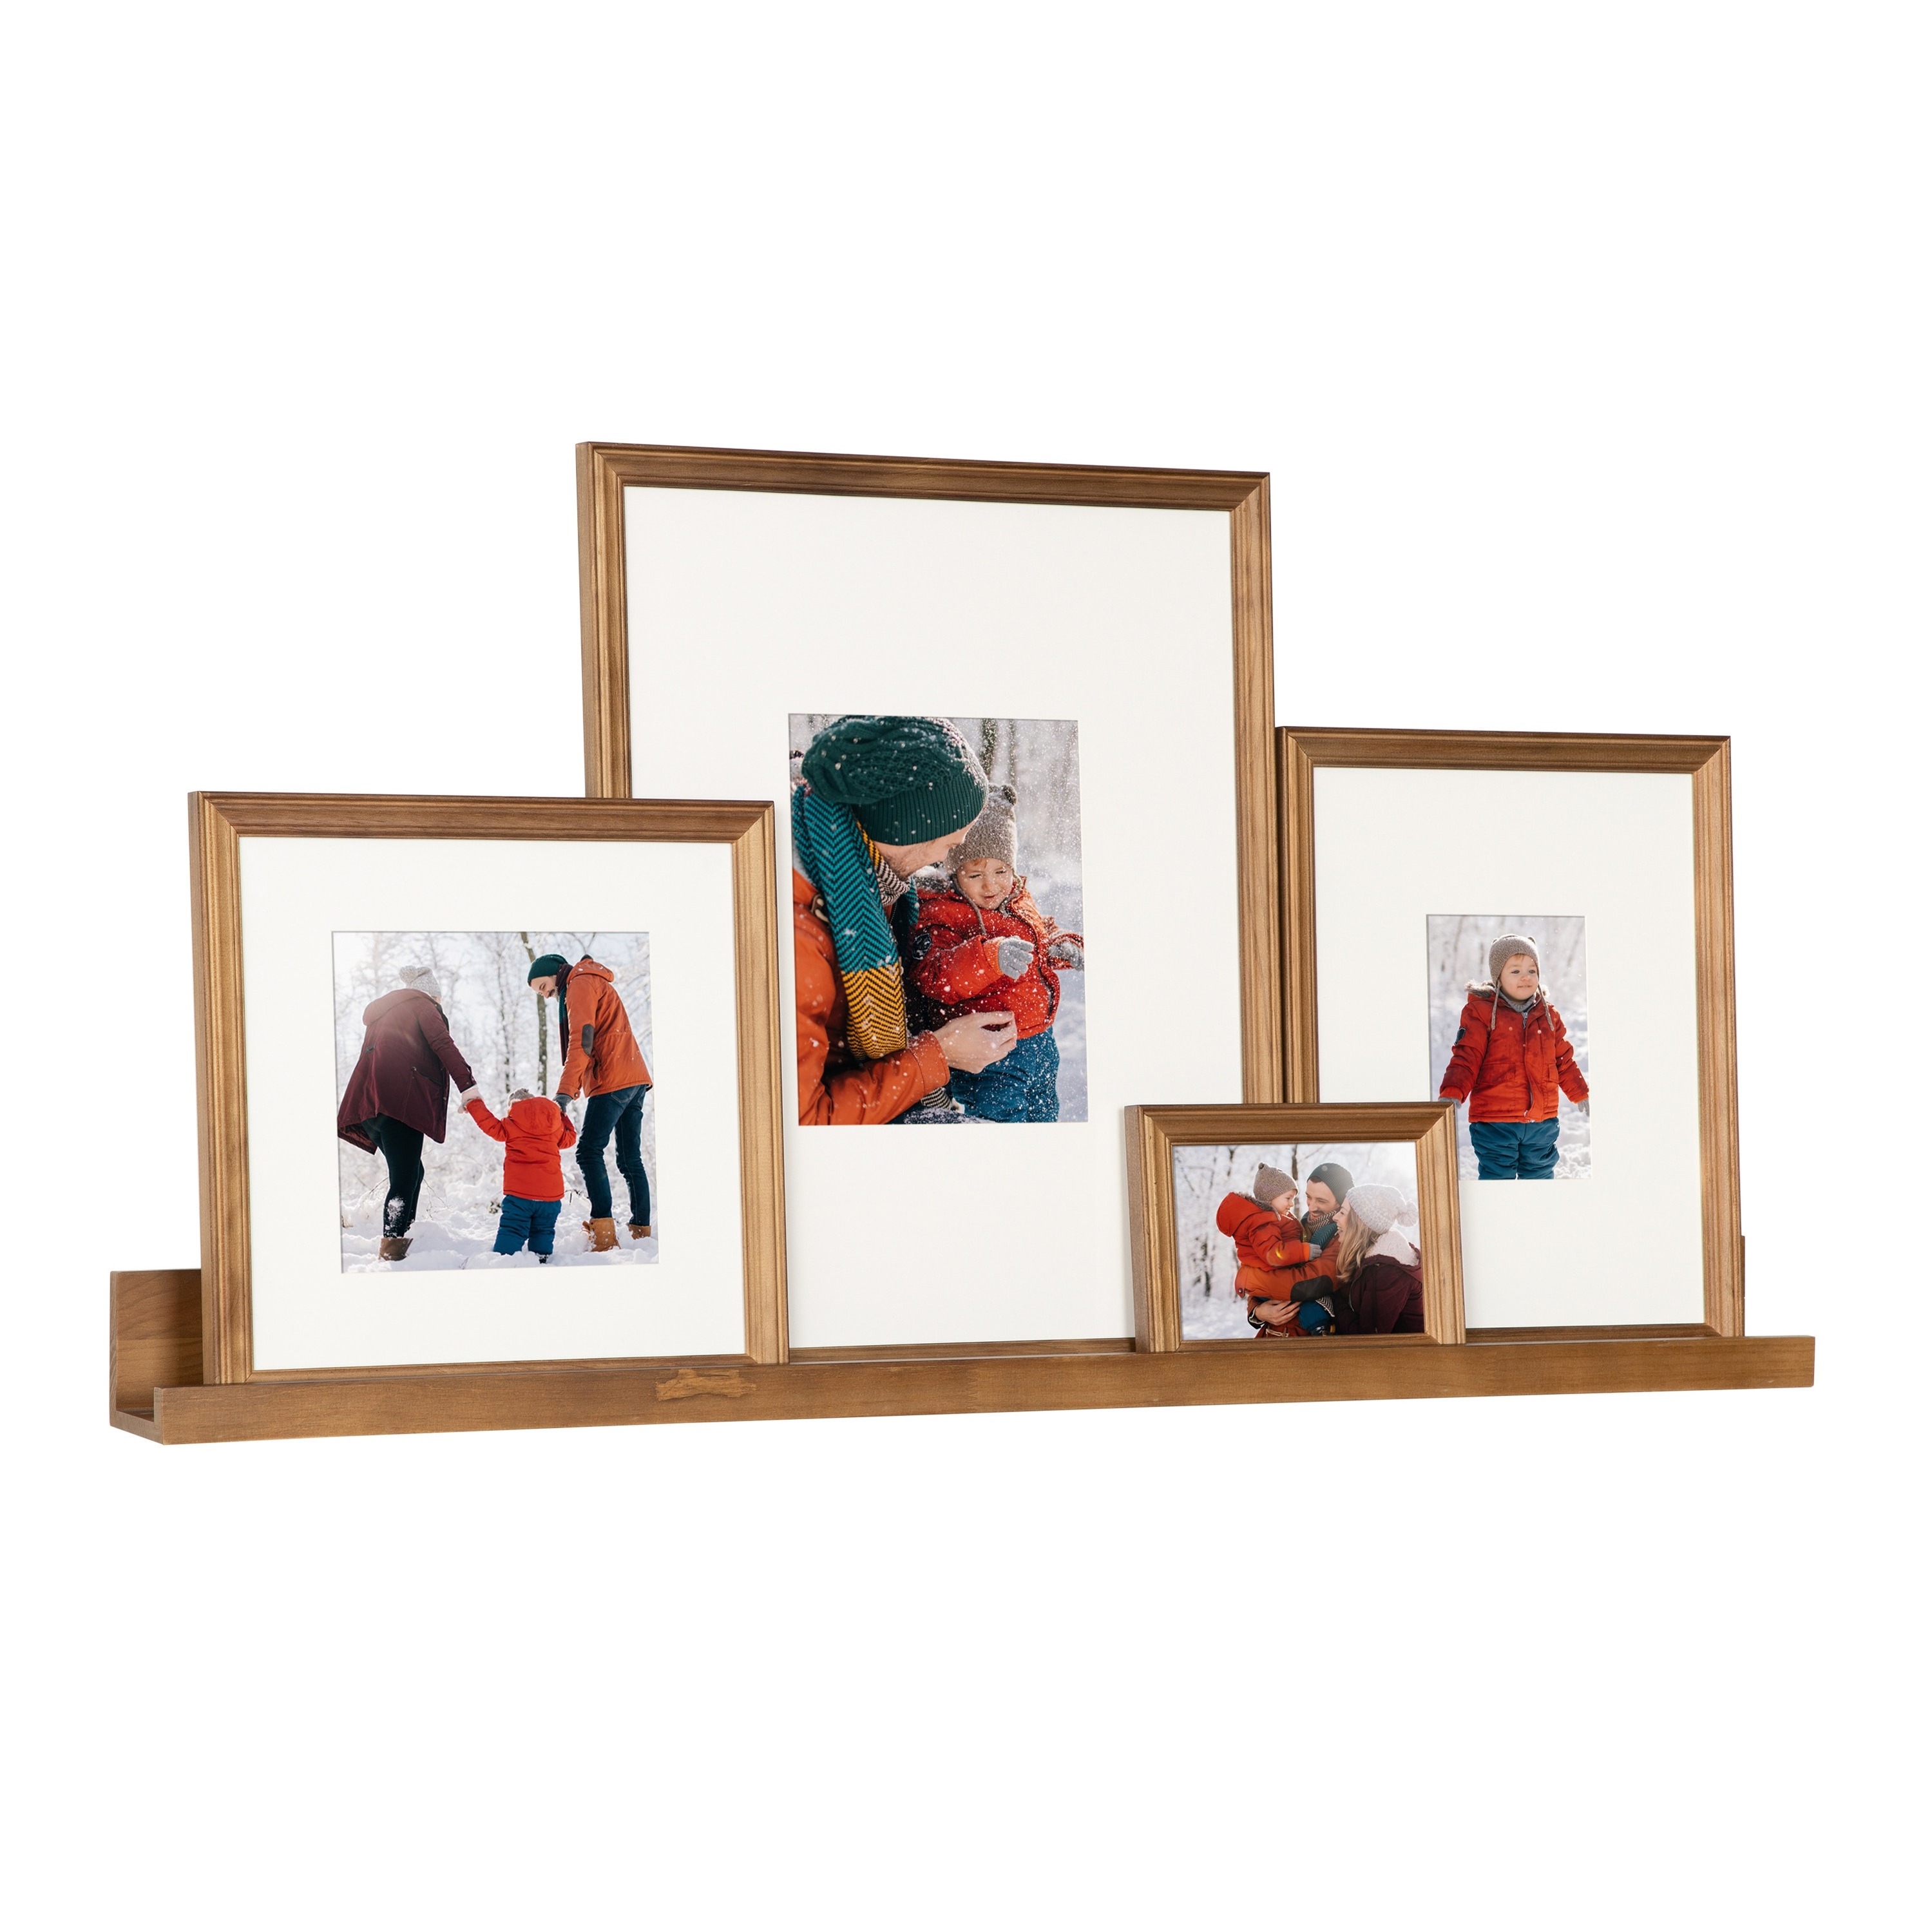 Bordeaux Transitional Picture Frame Set, Set of 5, Natural Rustic, Wooden Assorted Size Picture Frames with Shelf